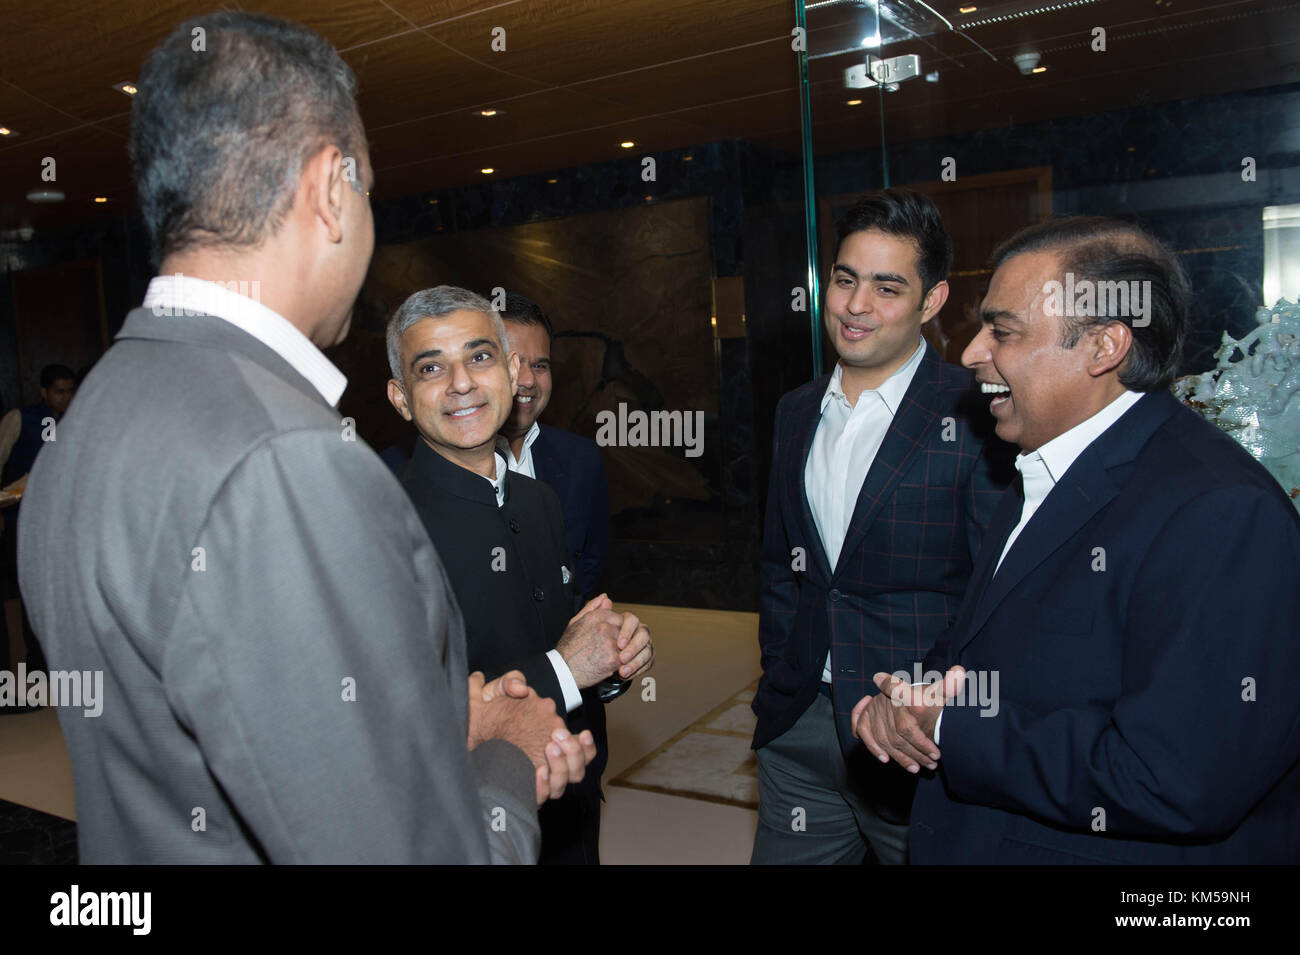 Mayor for London Sadiq Khan (second left) meets guests at a reception and dinner hosted by the billionaire businessman Mukesh Ambani (right) in Mumbai, India. The mayor is on a week long visit to the region to promote London and strengthen commercial and cultural ties with both Indian and Pakistani cities. Stock Photo